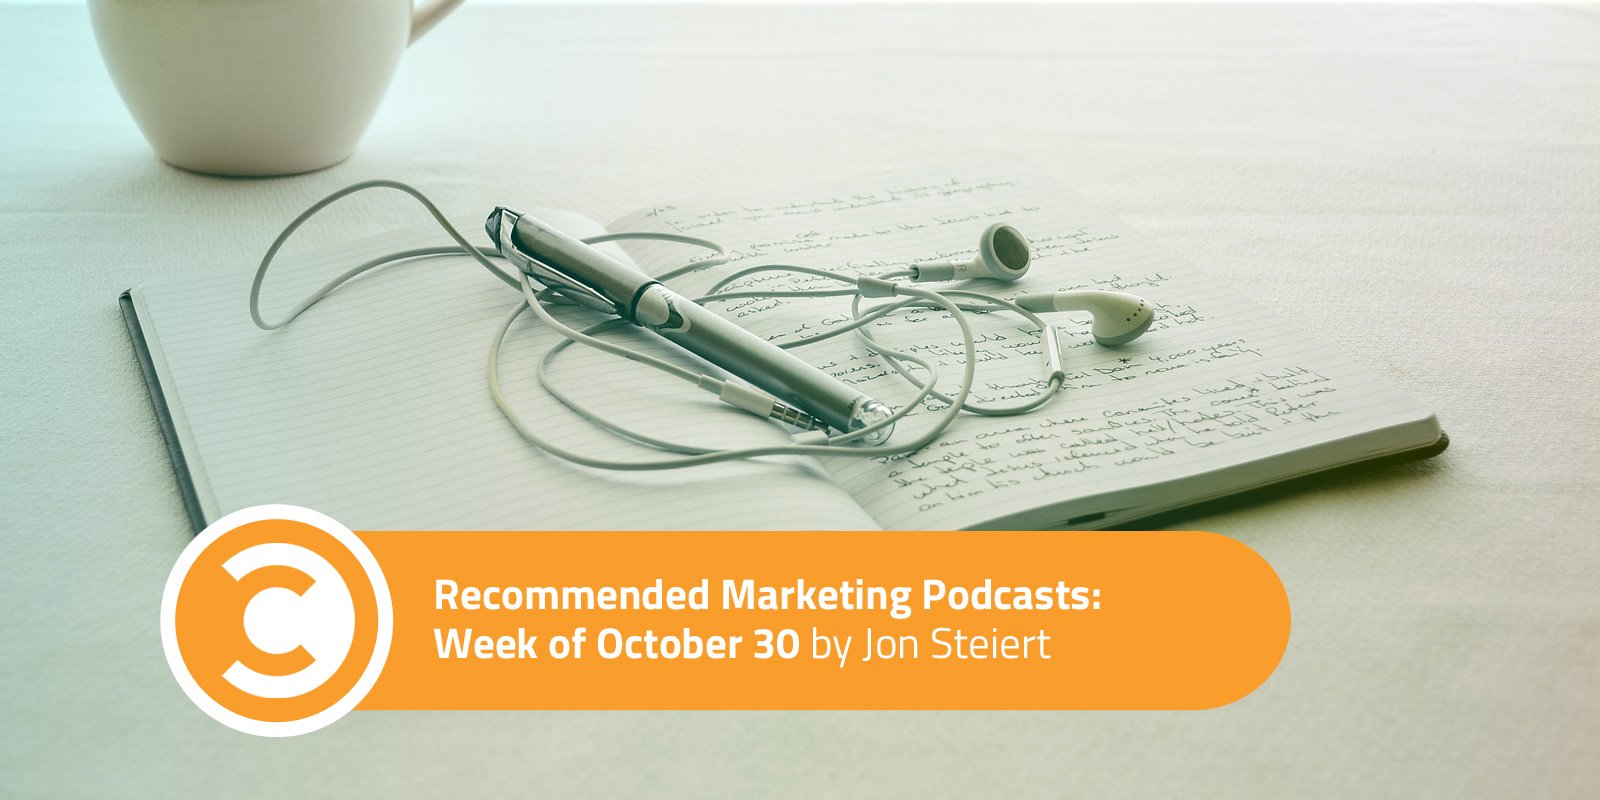 Recommended Marketing Podcasts Week of October 30